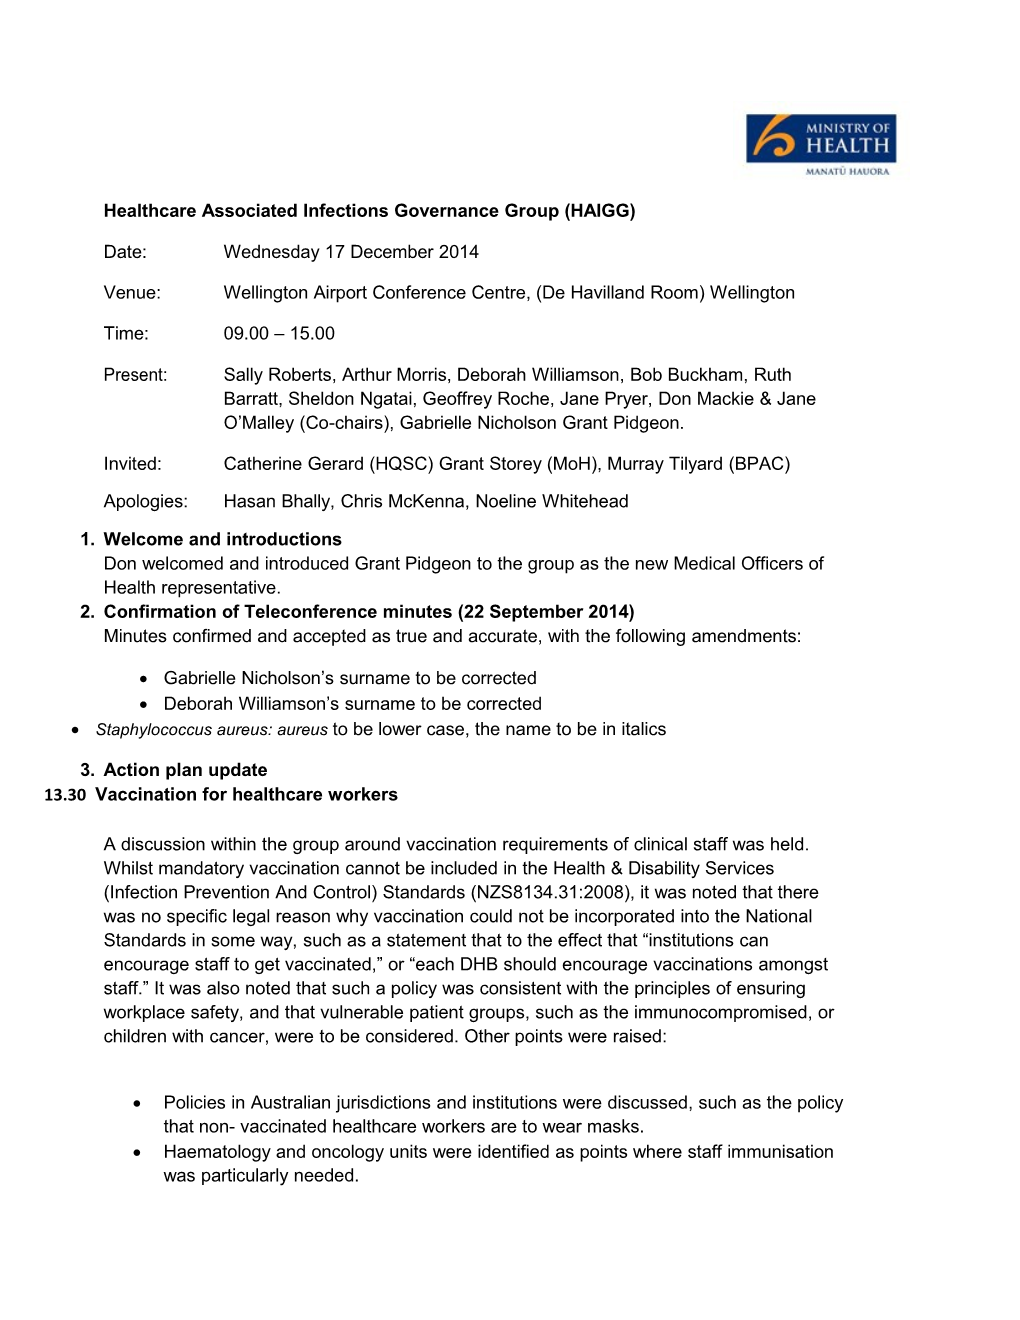 Healthcare Associated Infections Governance Group (HAIGG) Minutes 17 December 2014